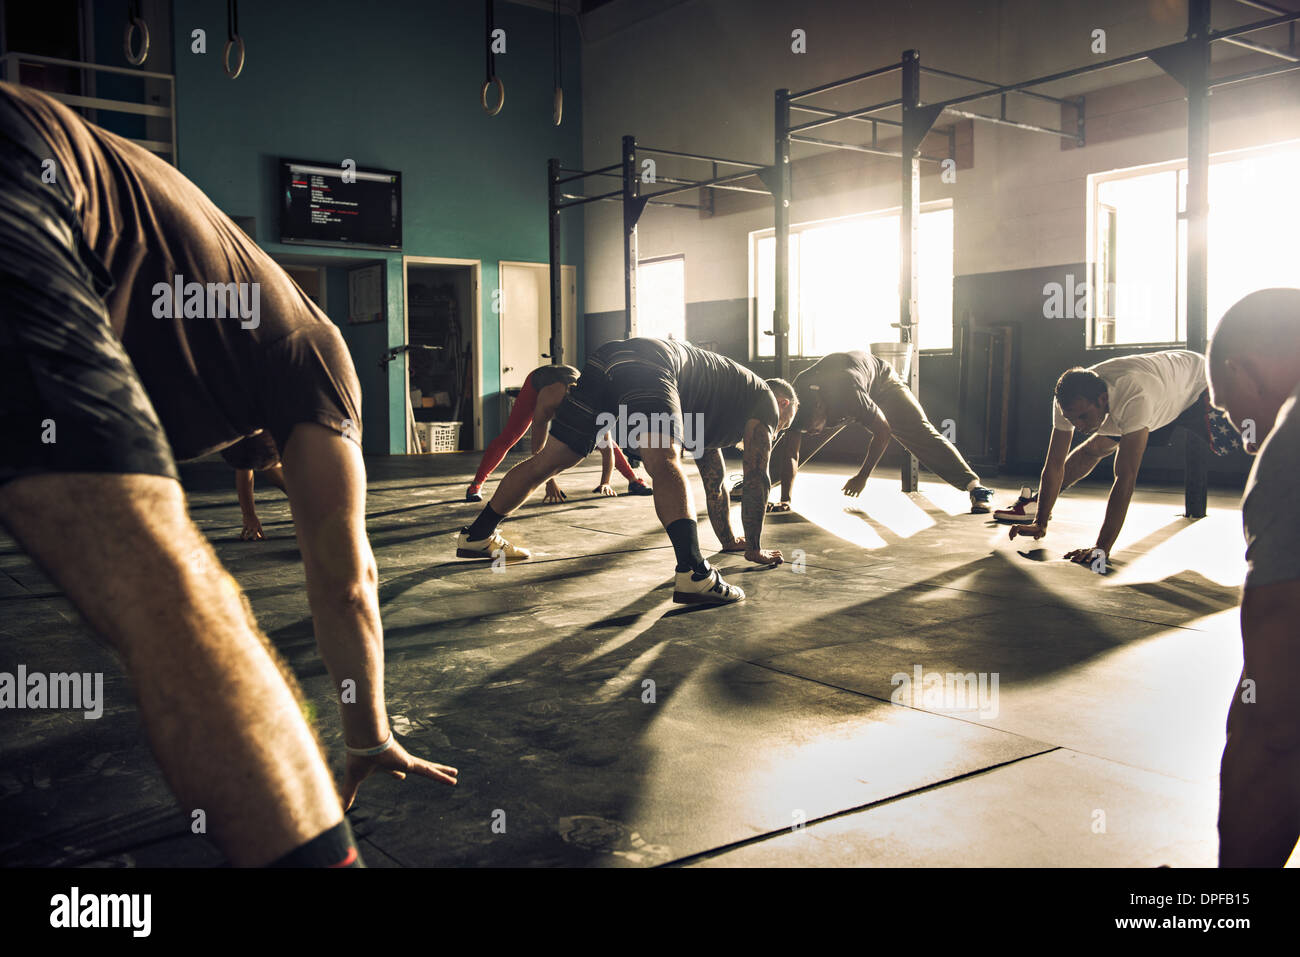 Fitness group training together in gym Stock Photo